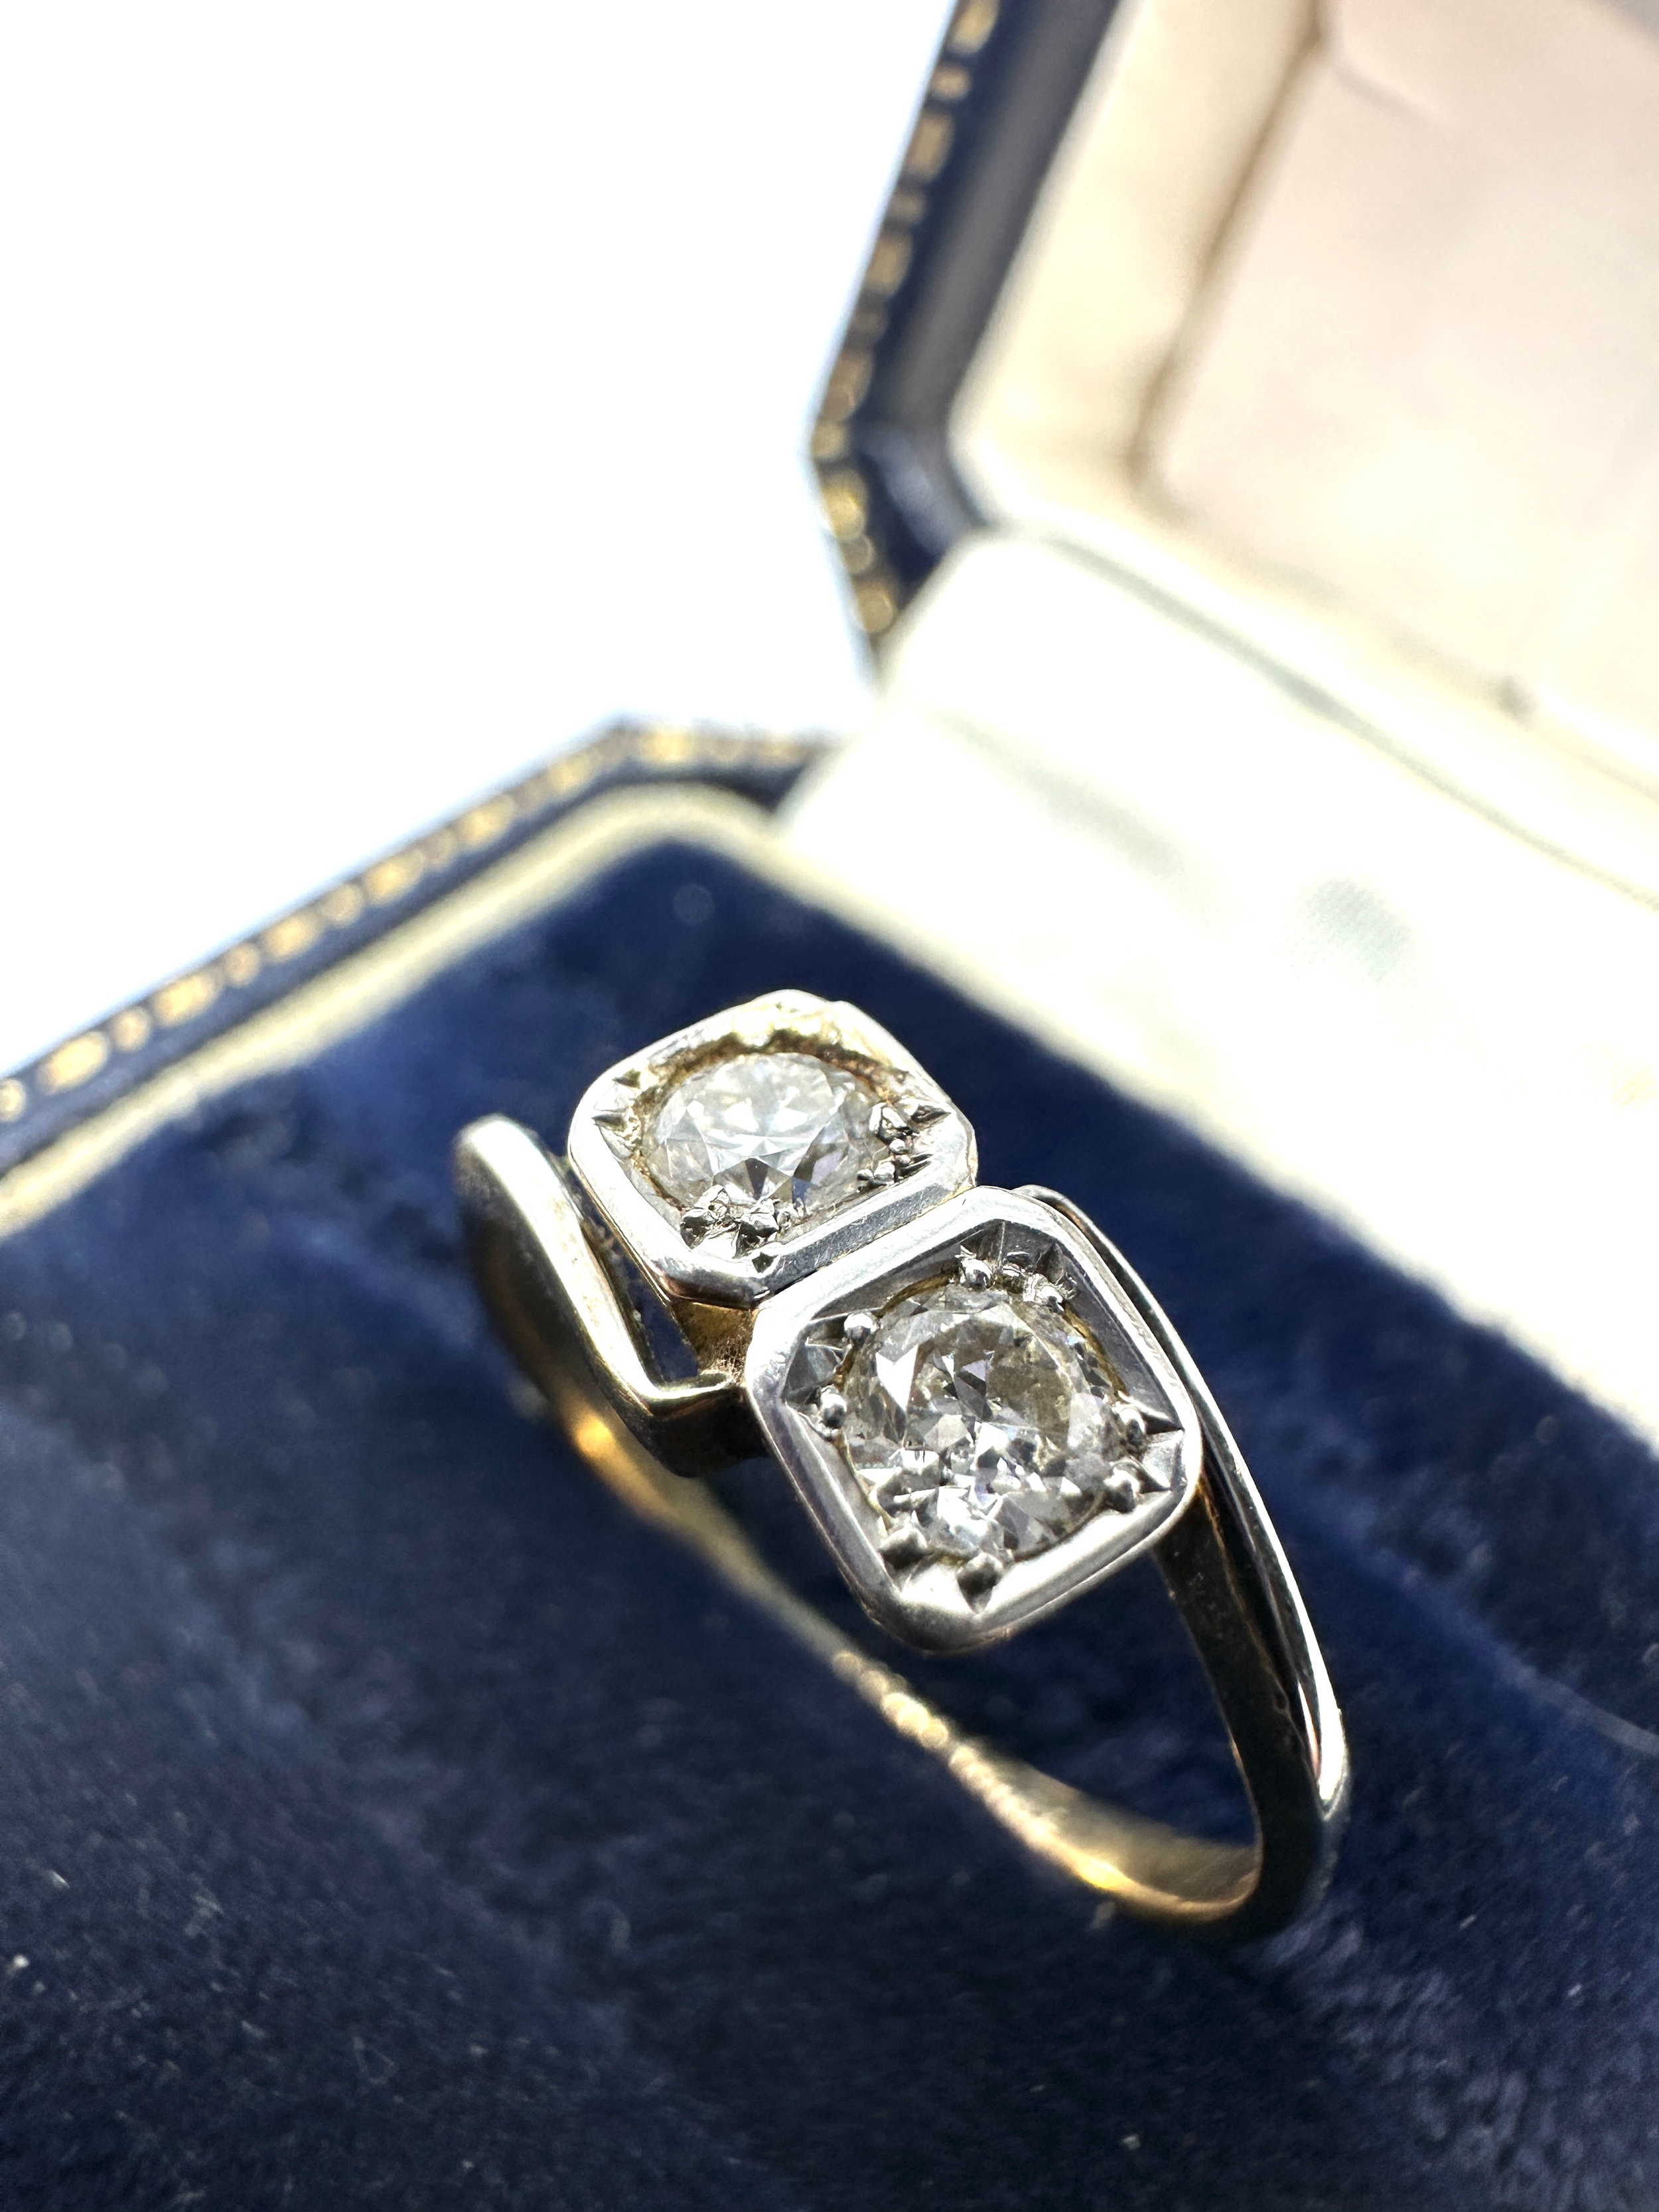 18ct gold diamond ring set with 2 diamonds each measure approx 4mm est 0.40ct weight 2.6g - Image 3 of 4